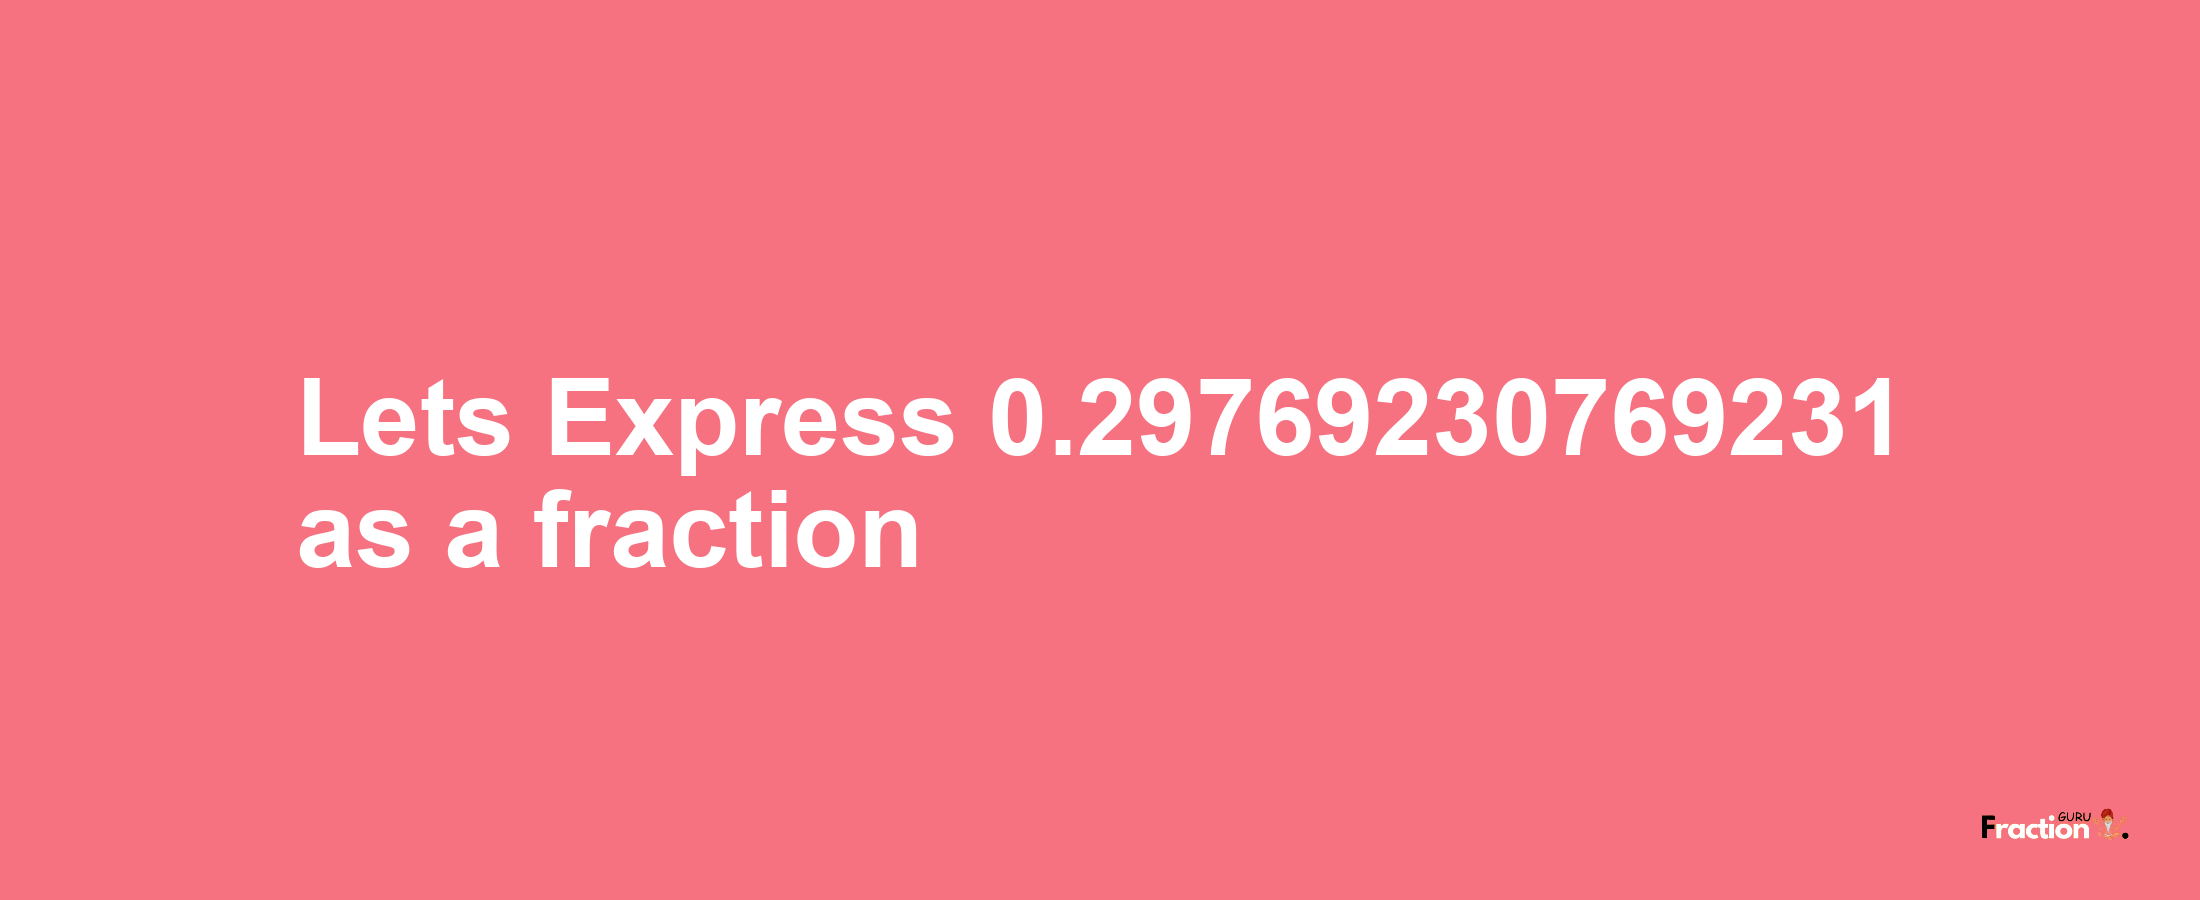 Lets Express 0.29769230769231 as afraction